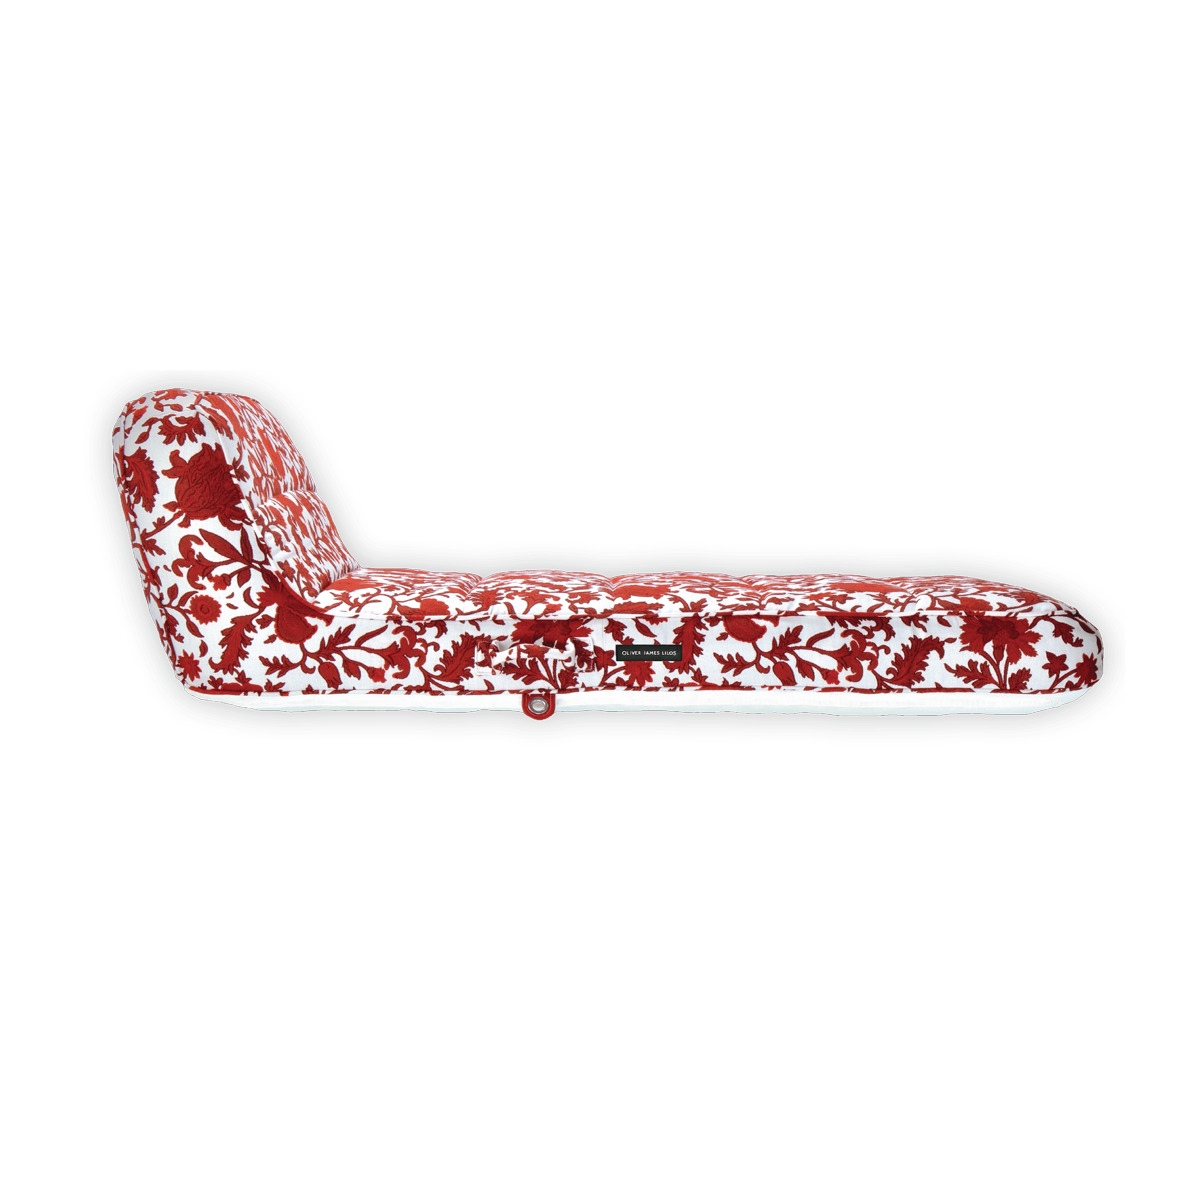 The side of a luxury pool float in a red and white patterned fabric.